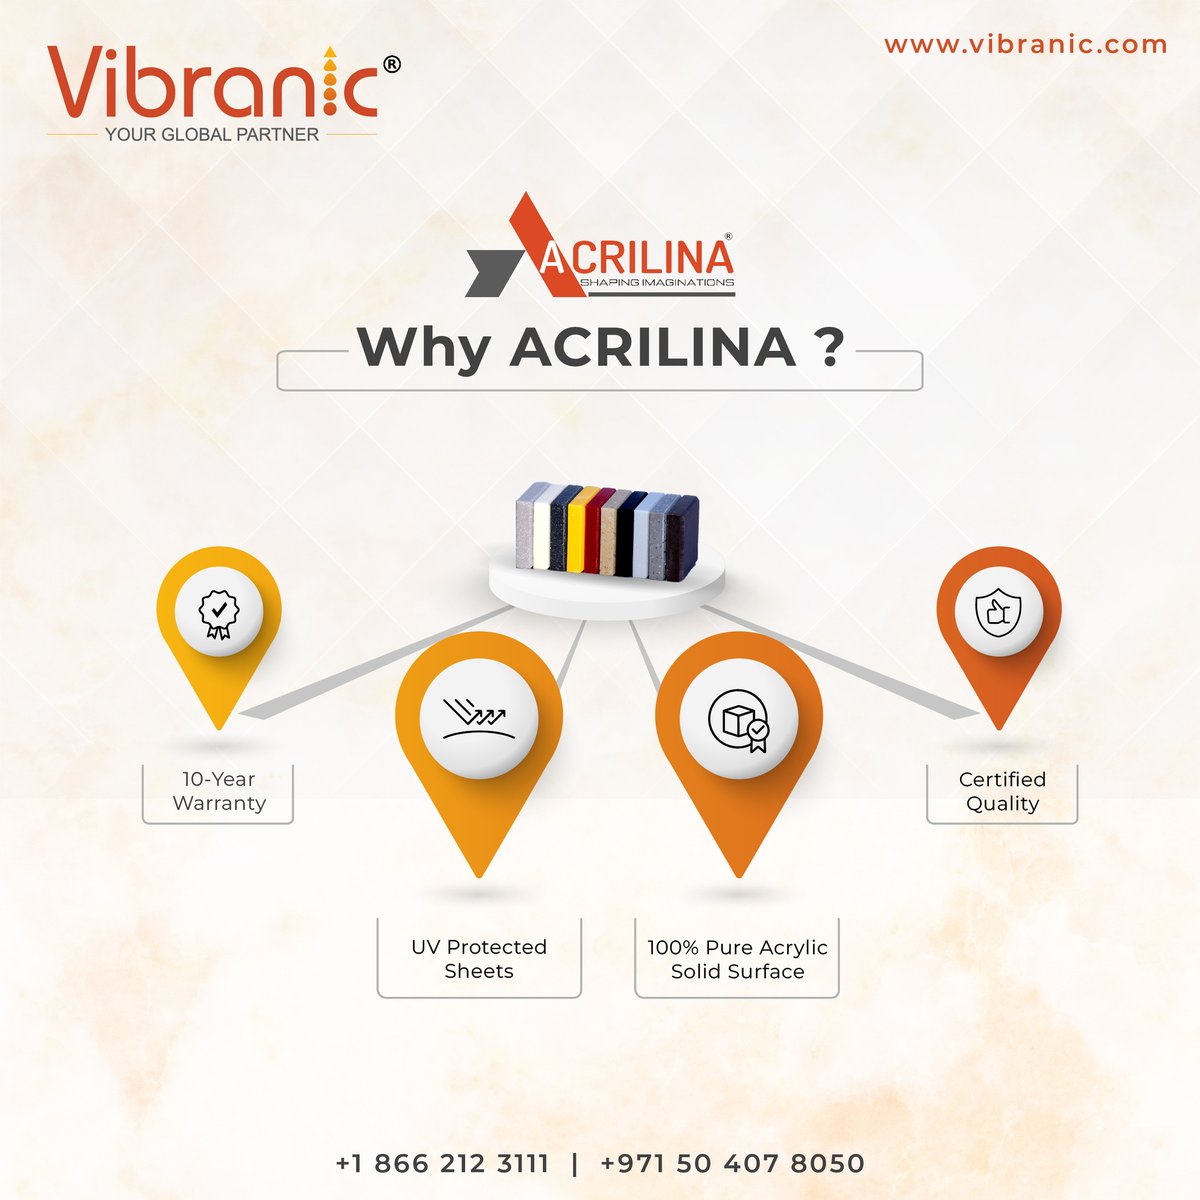 Experience the Ultimate in Durability and Style, Enhanced by UV Protected Sheets. Choose from our wide range of Acrylic Solid Surfaces to create your style statement.

For more details, please reach us at mail@vibranic.com or call us at +1 866 212 3111, +971 504078050

#Vibranic